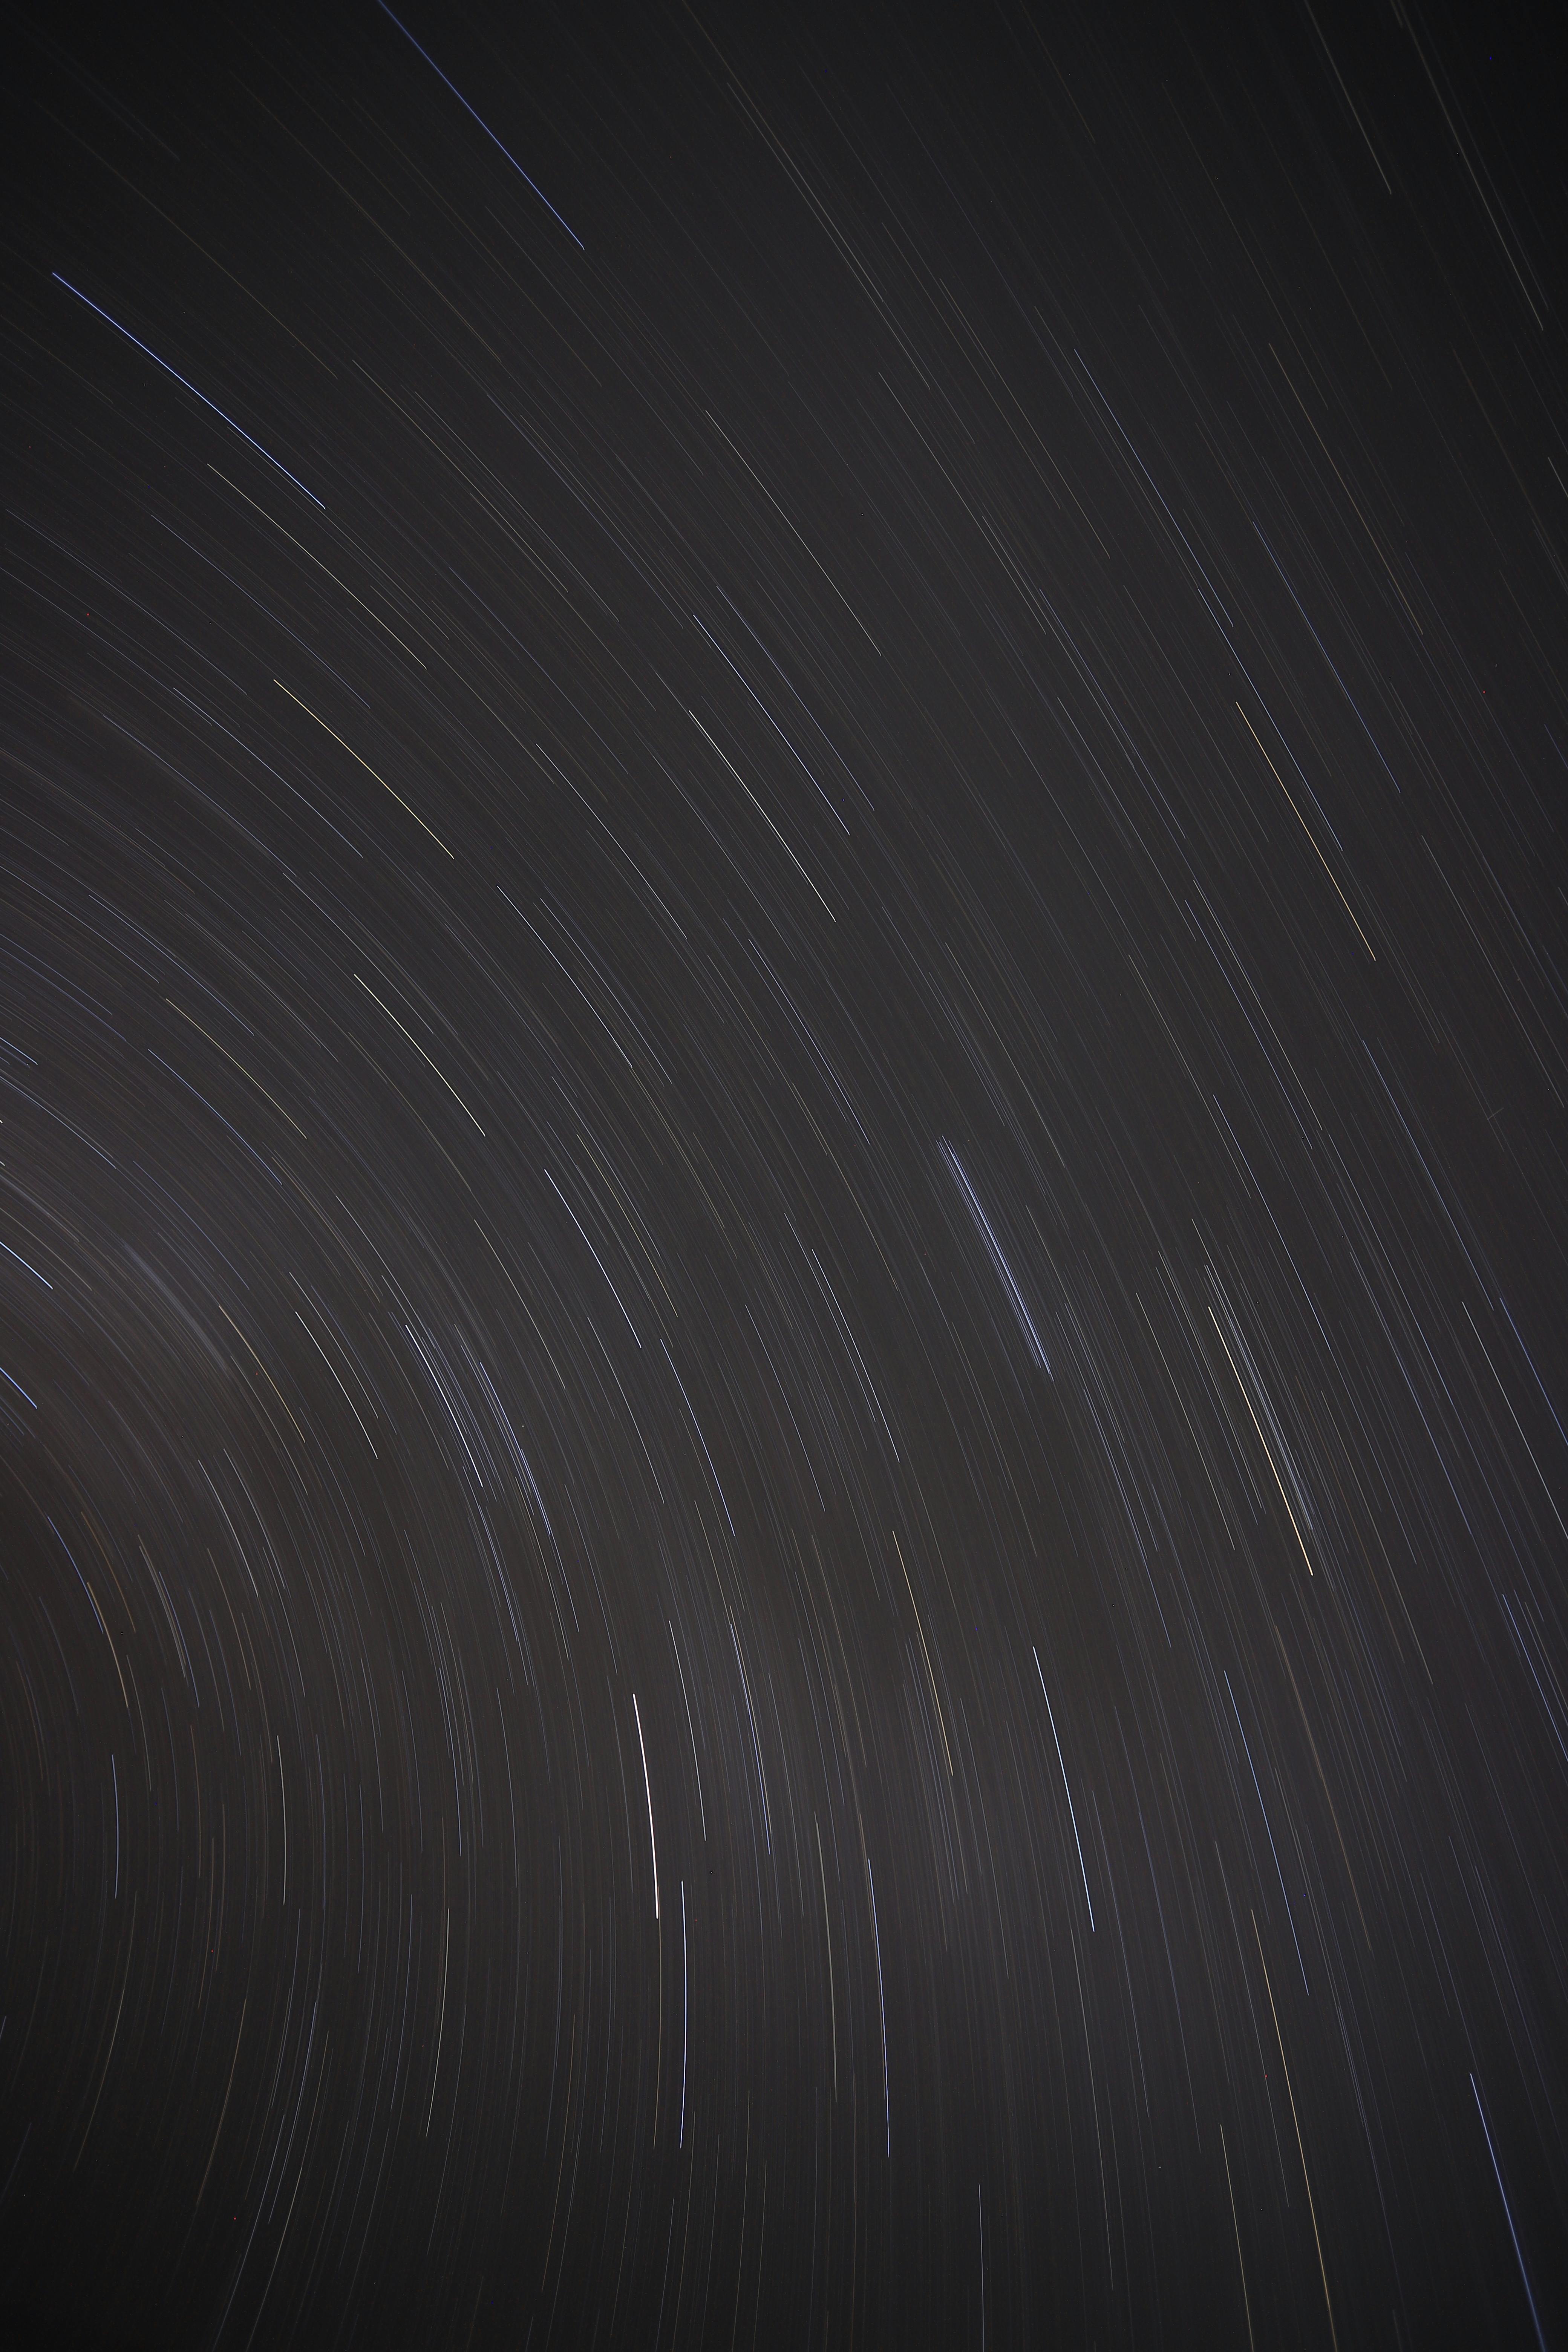 Free stock photo of electric lines, lines and curves, star trails photography